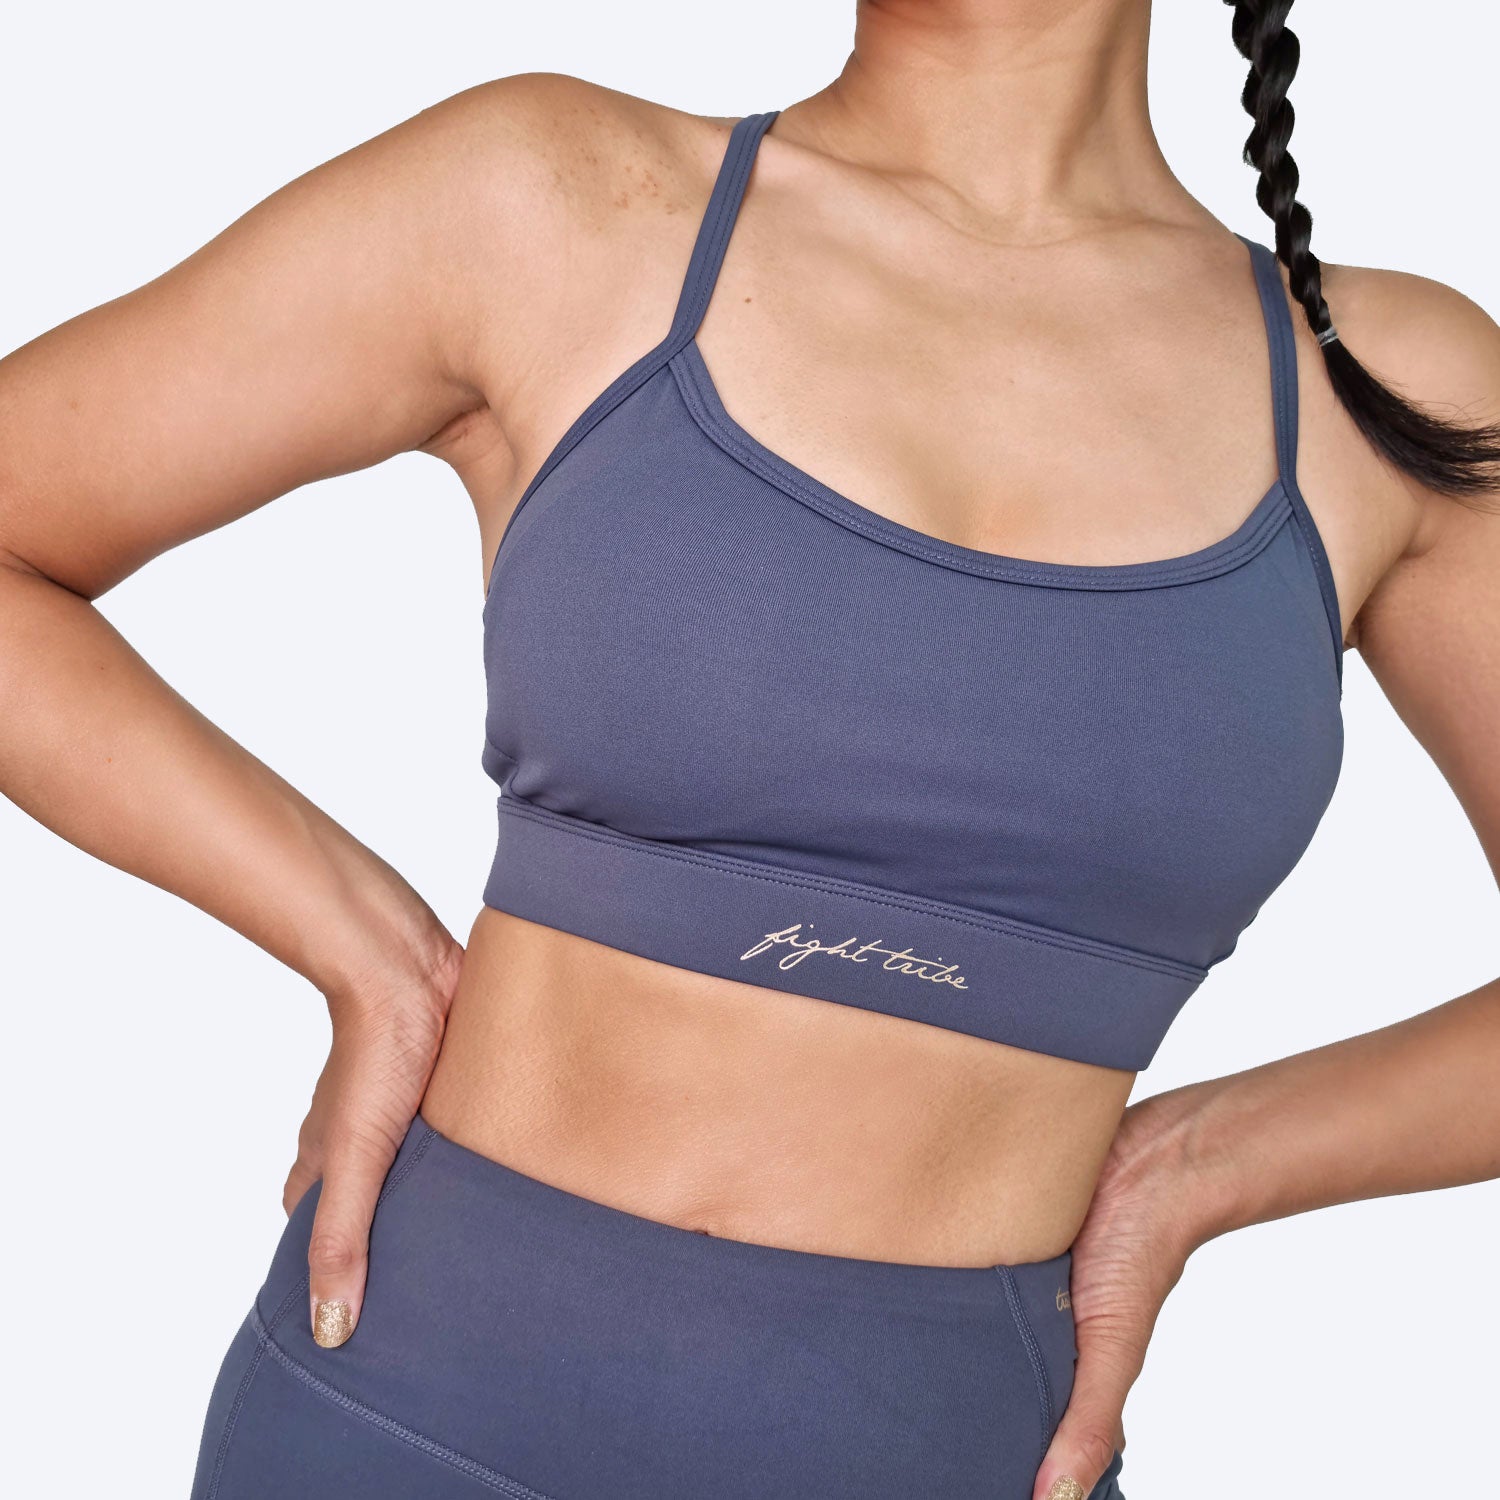 Eris Sports Bra (Stone Blue) - sports bra for kickboxing, muay thai, boxing,  mixed martial arts and other combat sports